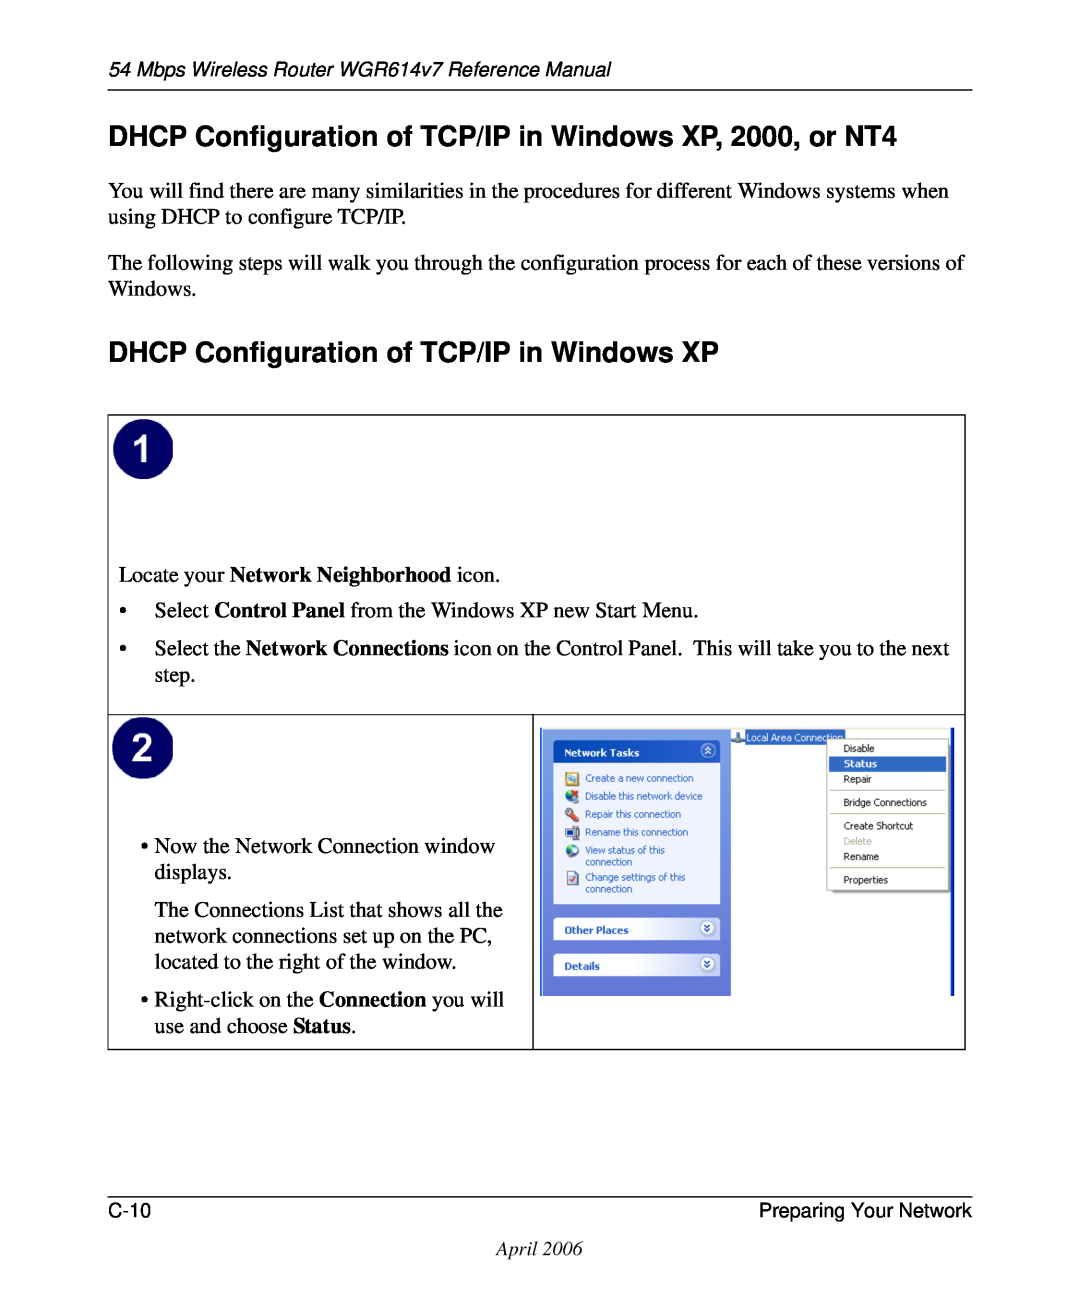 NETGEAR WGR614v7 manual DHCP Configuration of TCP/IP in Windows XP, 2000, or NT4, Locate your Network Neighborhood icon 